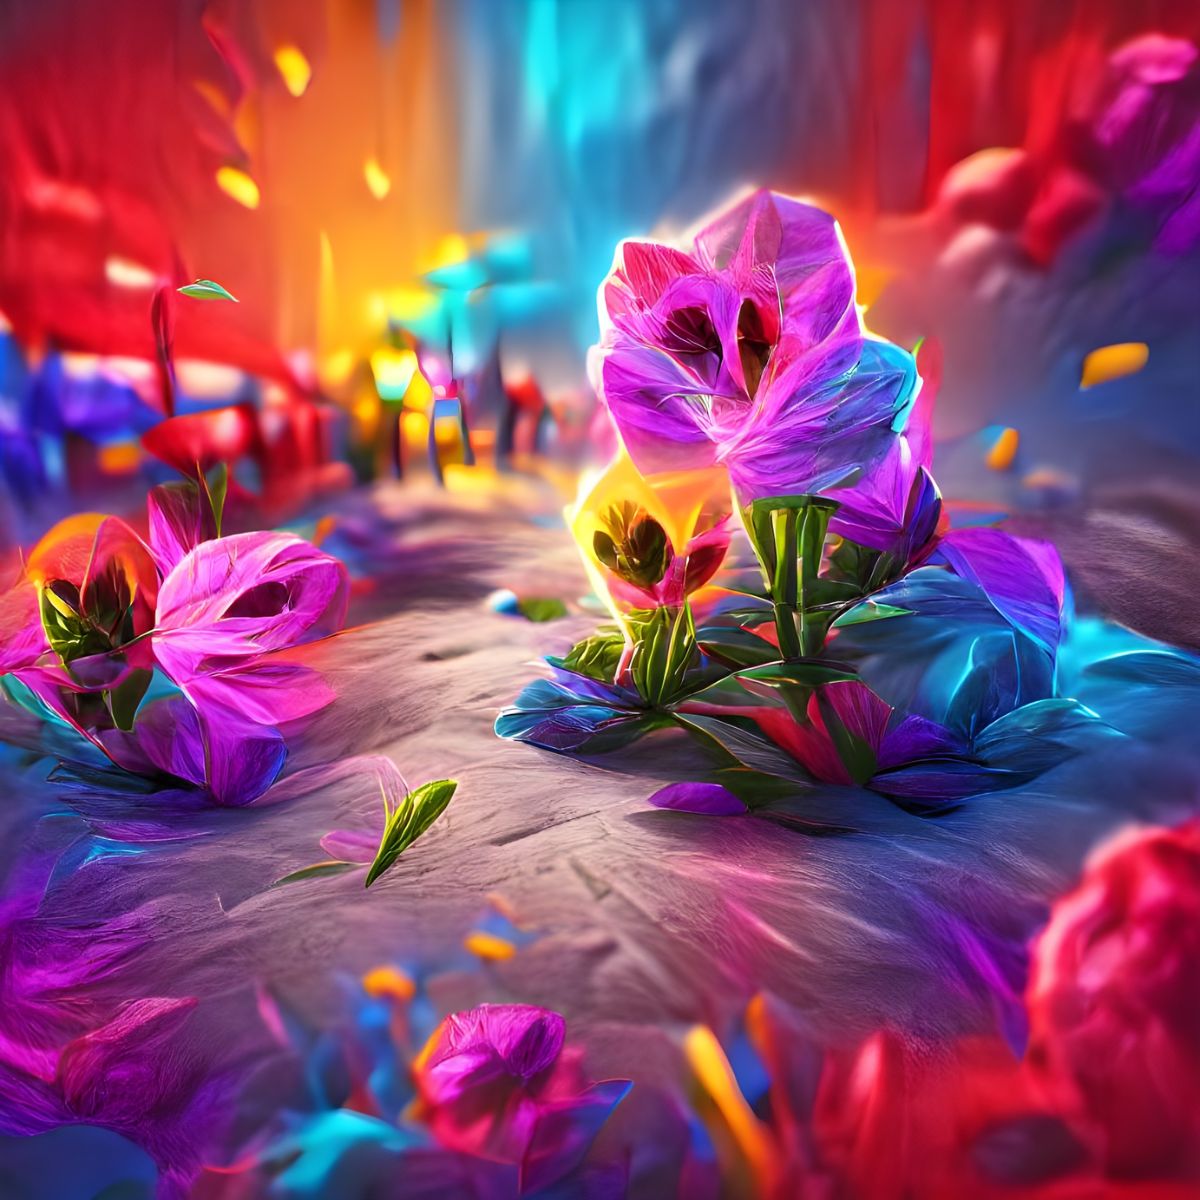 nfts-of-flowers-featured